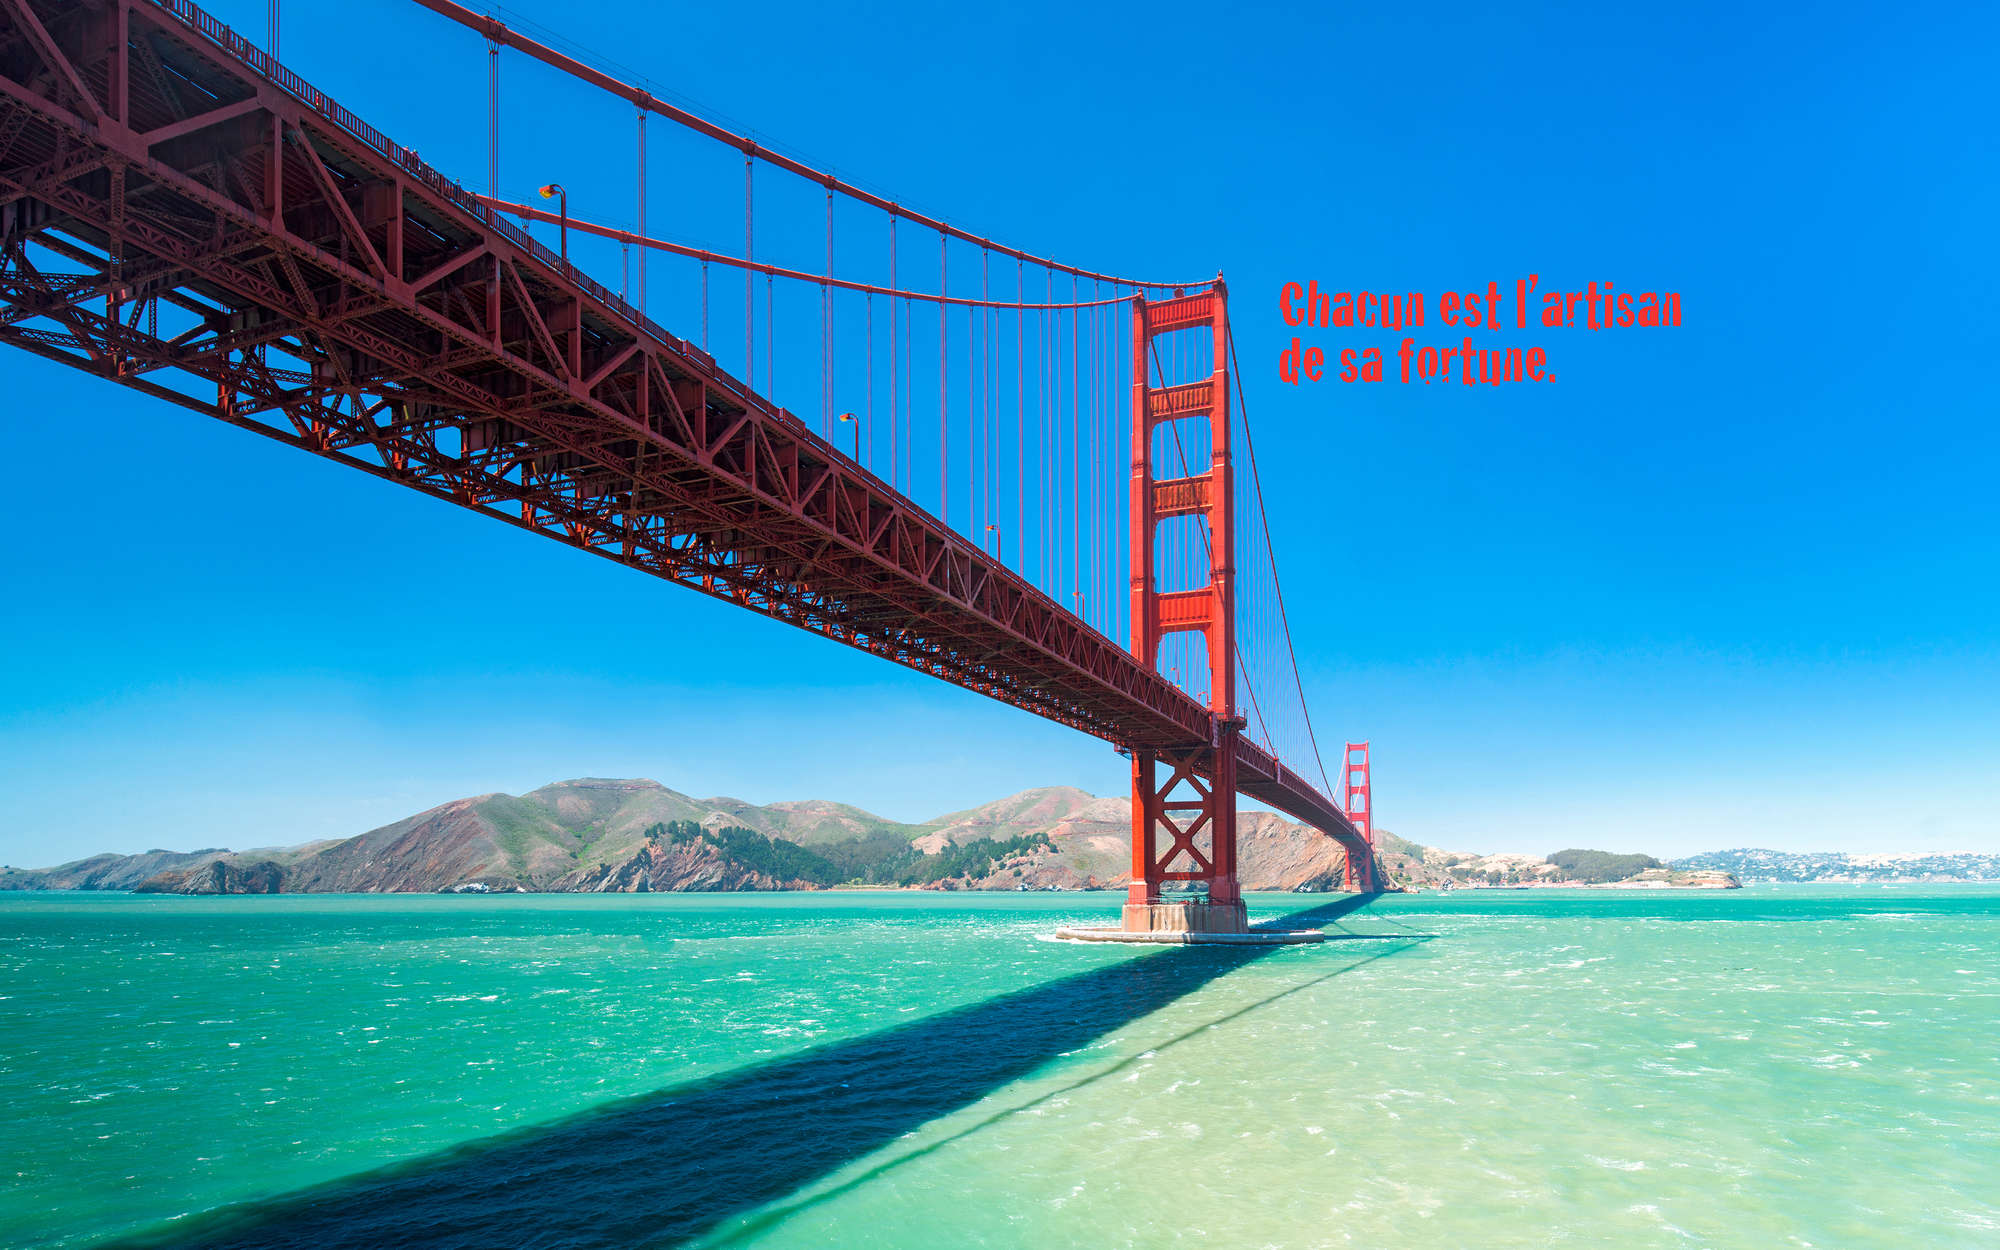             Golden Gate Bridge wallpaper with lettering in French - mother-of-pearl smooth non-woven
        